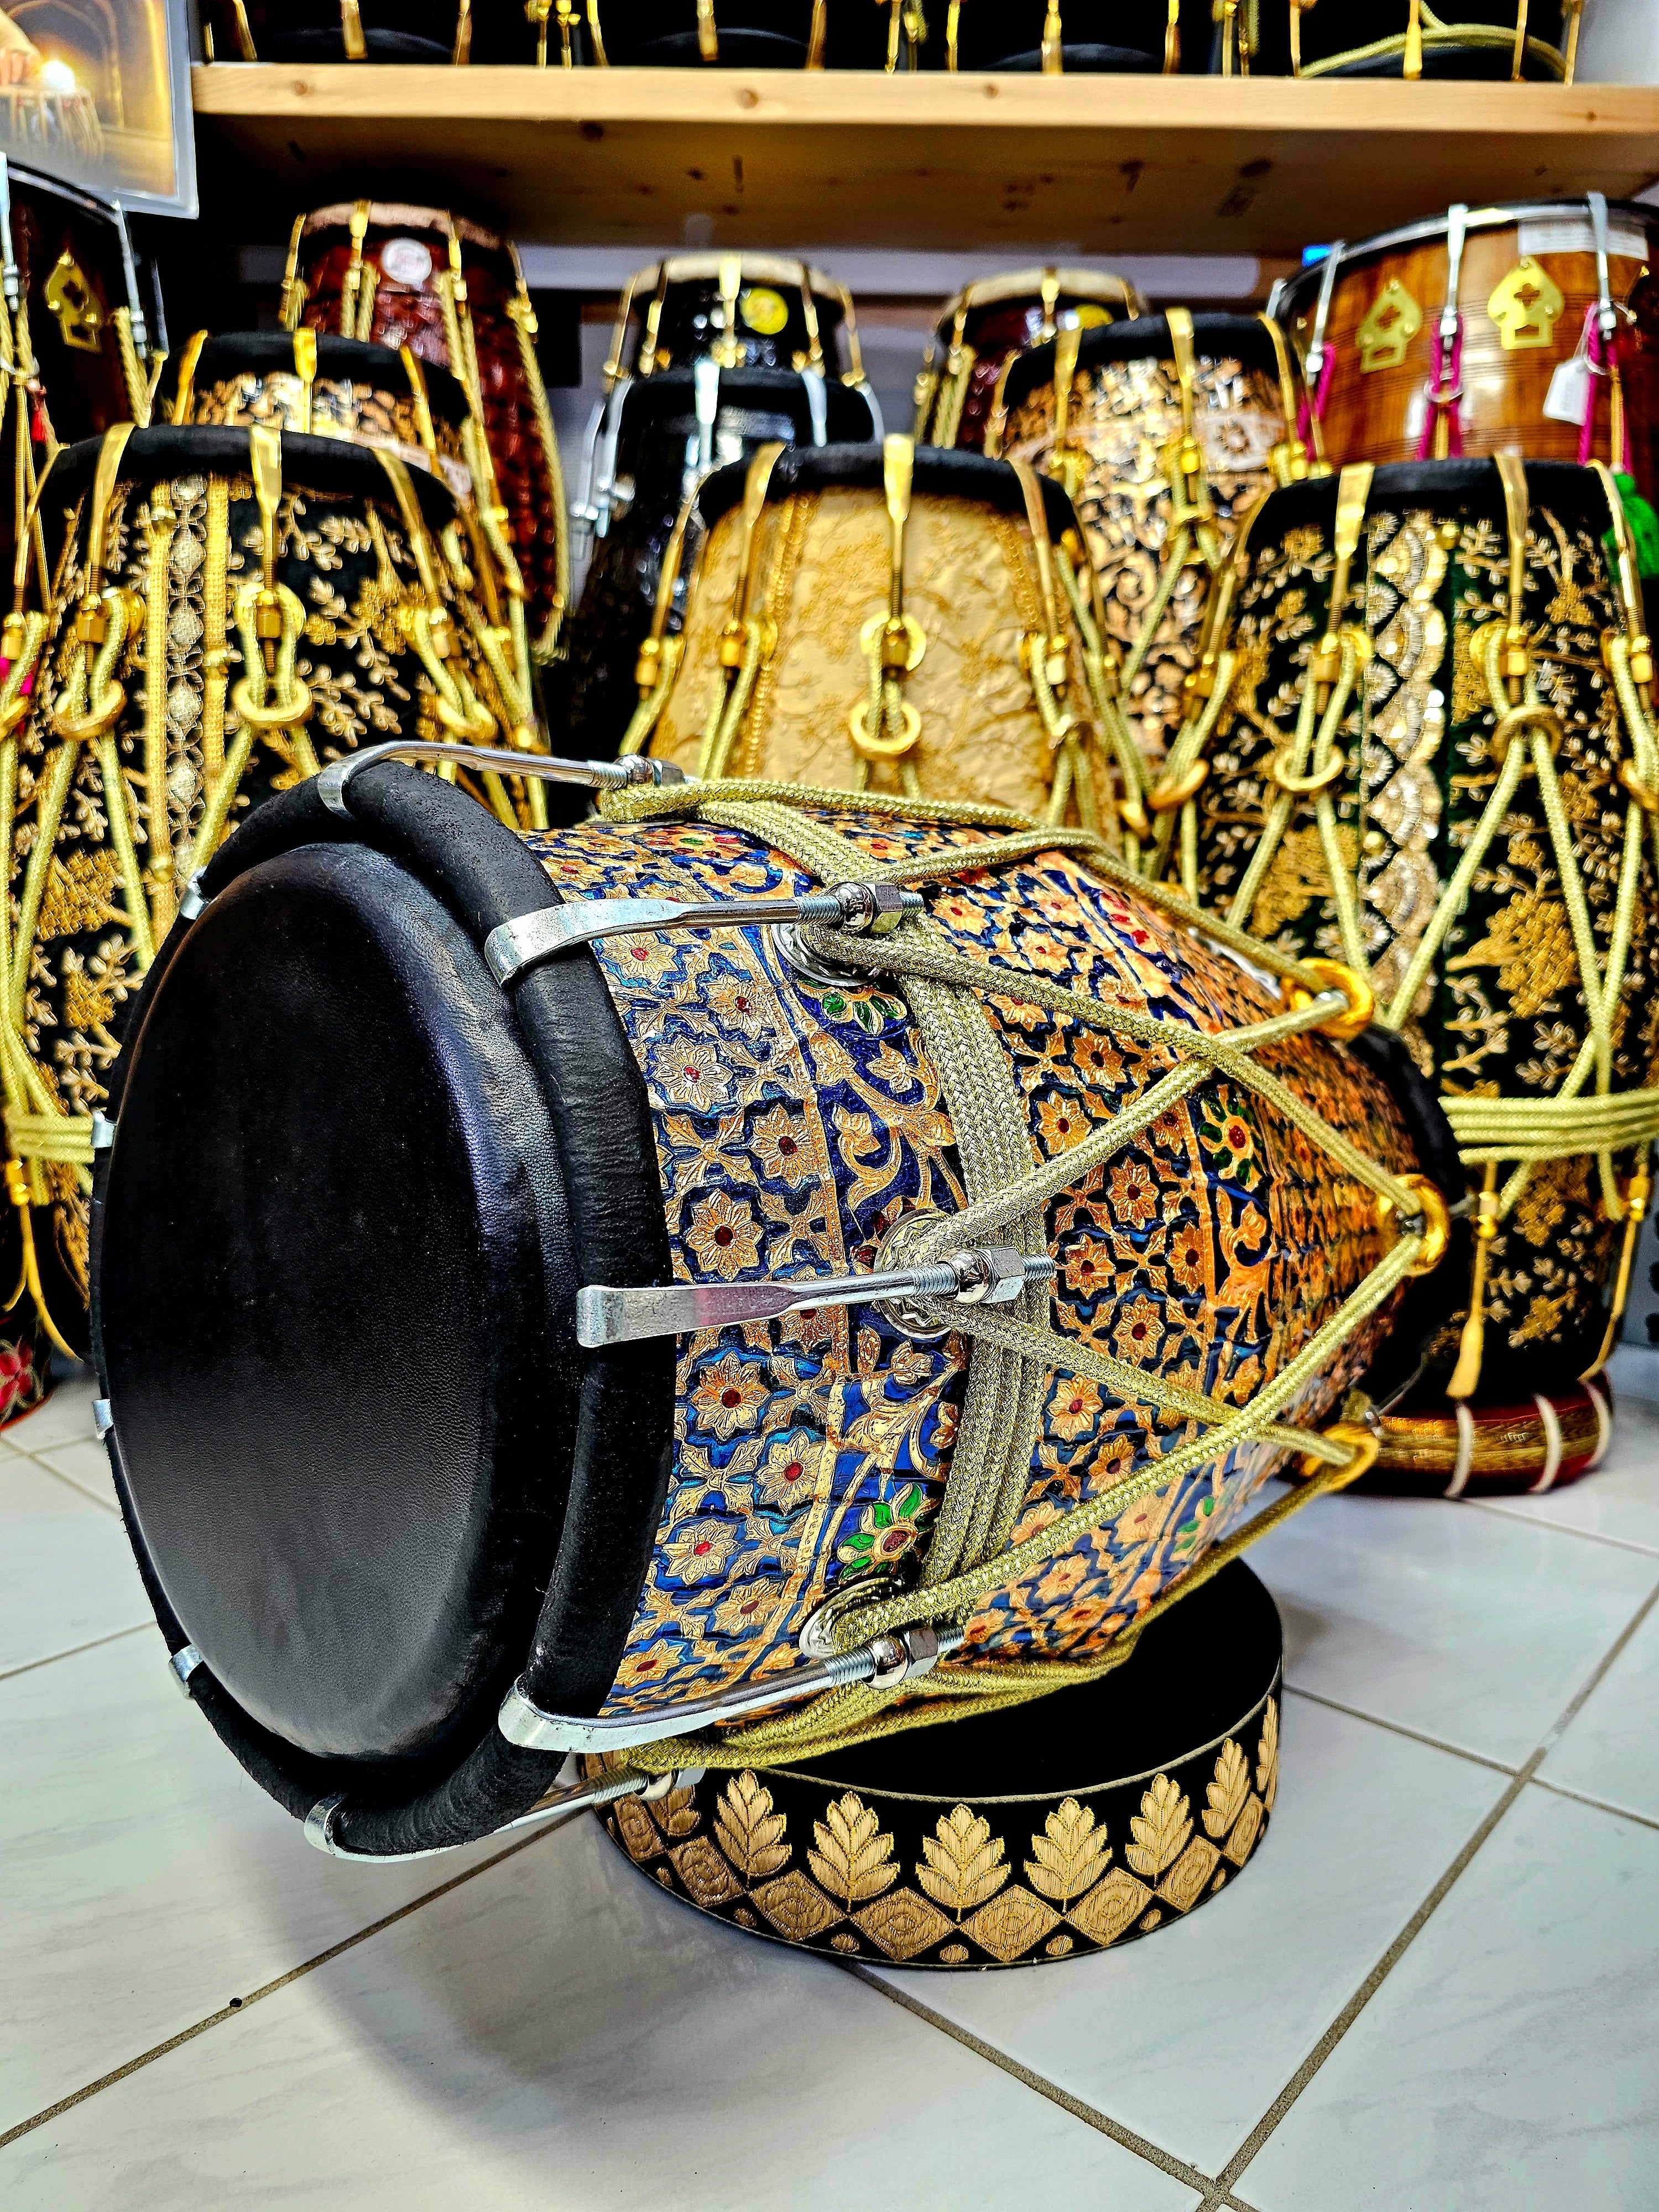 Harmony in Hues: Blue and Gold Designer Wrapped Red Sheesham Dholak with Black Skins and Chrome Bolts (BLACK FRIDAY SALE!)